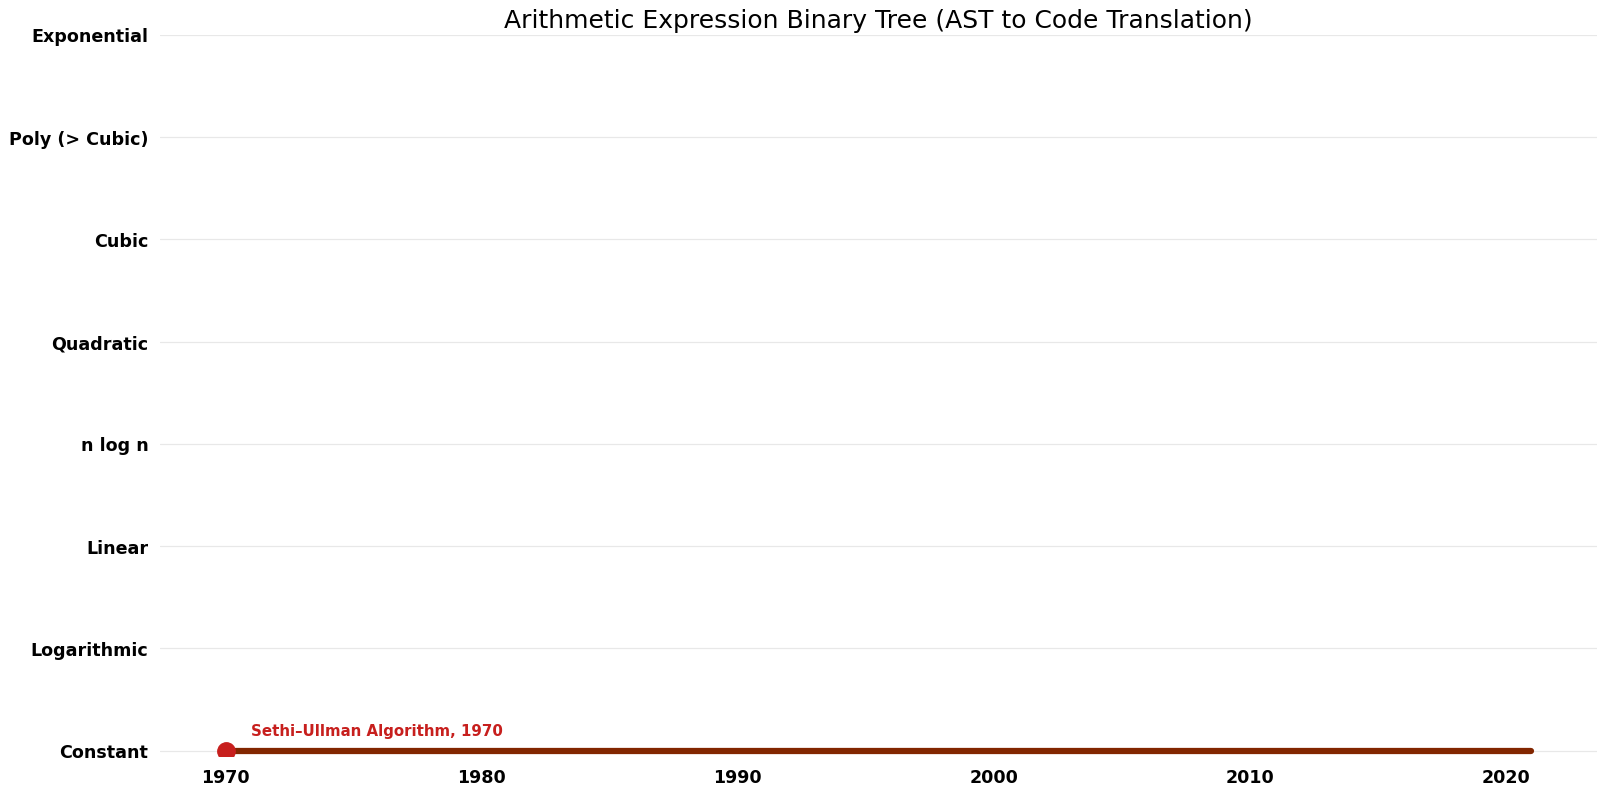 AST to Code Translation - Arithmetic Expression Binary Tree - Space.png